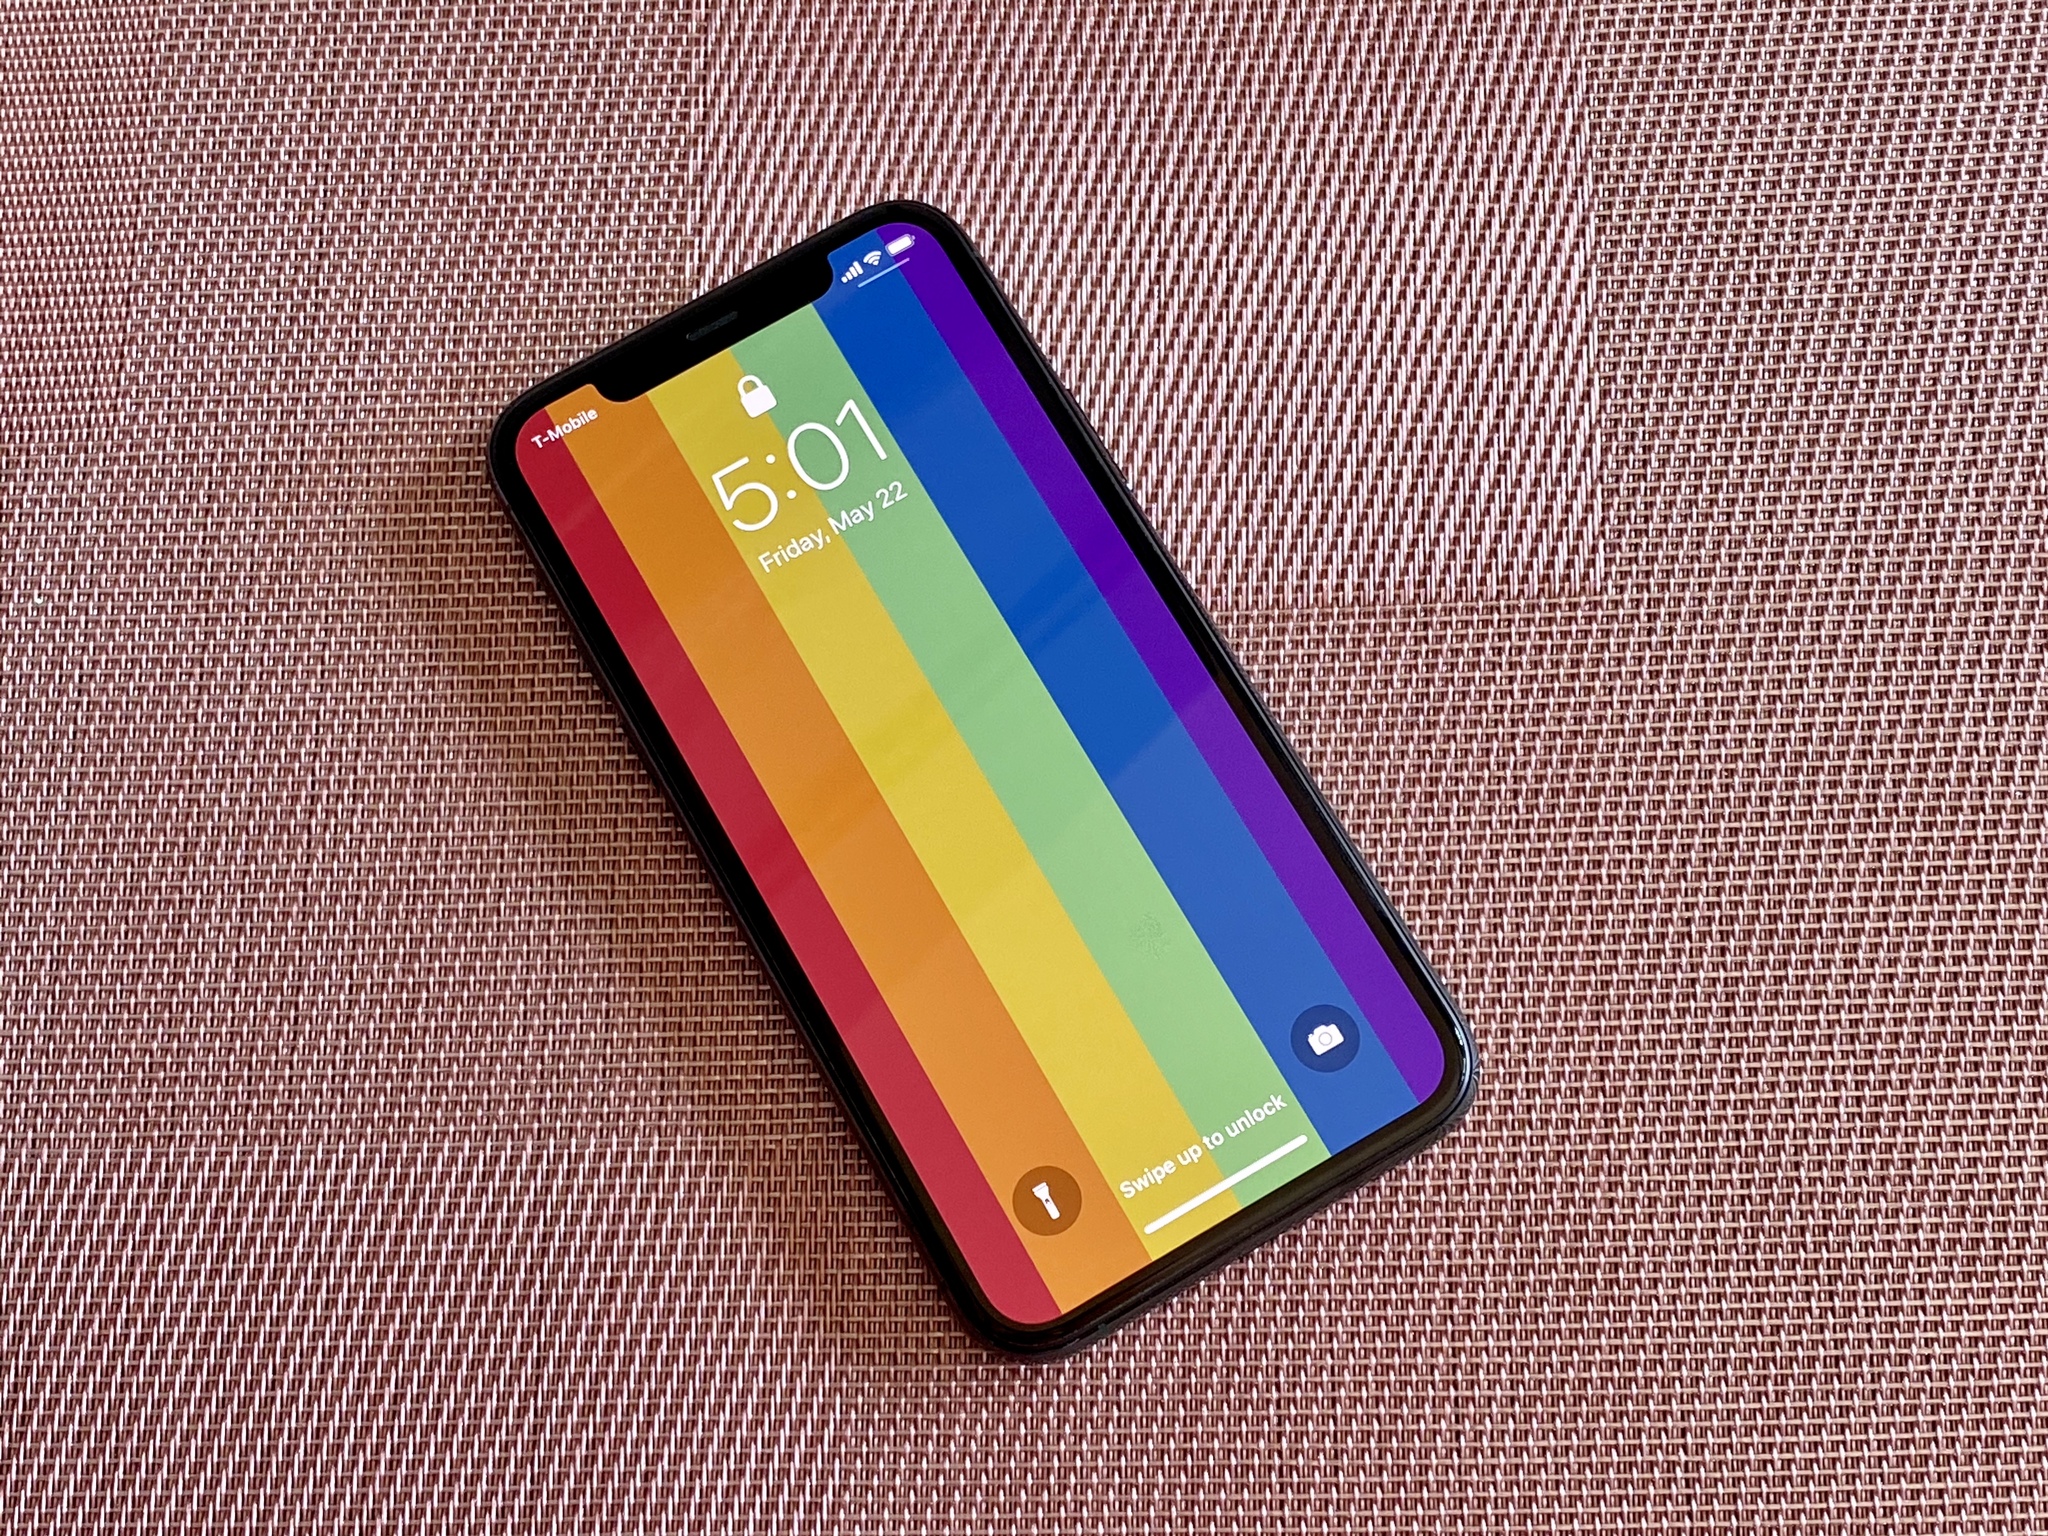 Download New Pride wallpaper of IOS 165 in any iPhone   Ultra HD   YouTube